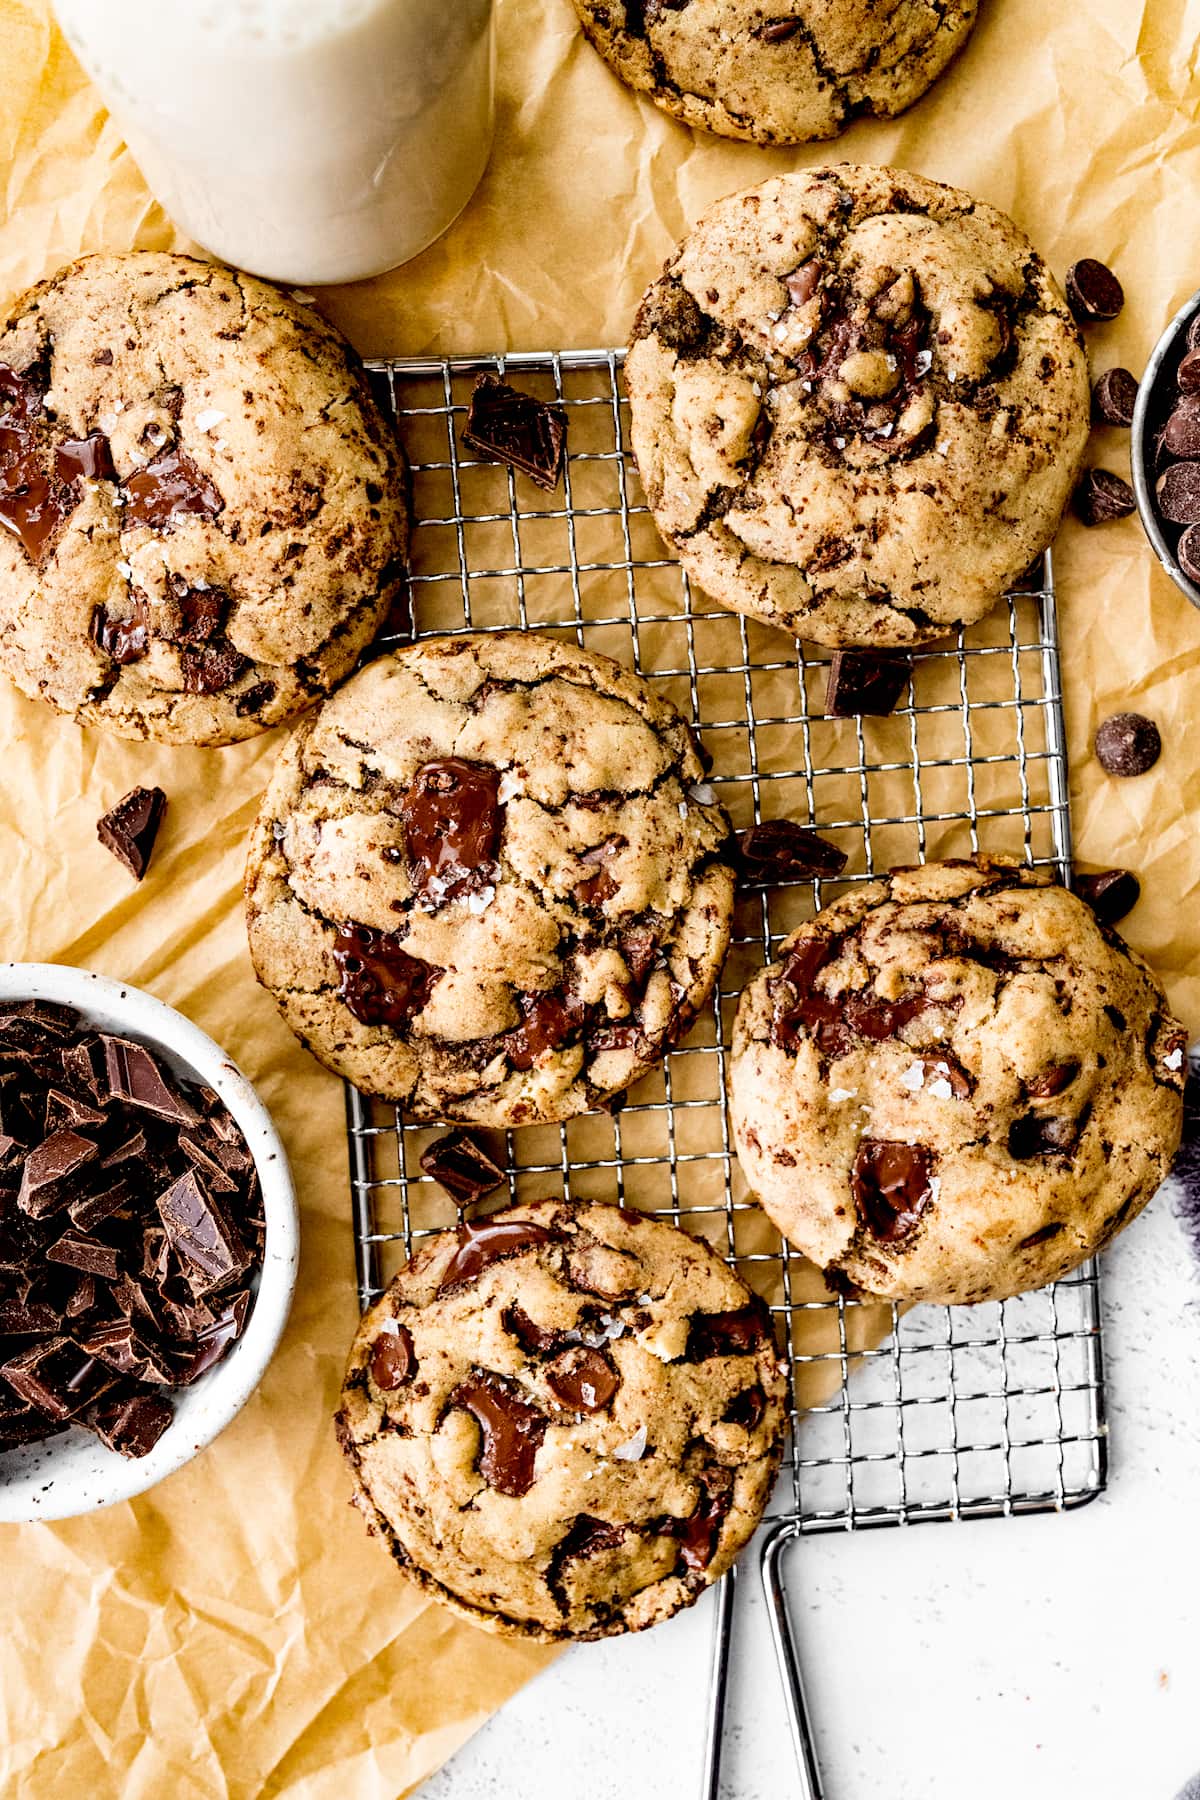 The BEST Chocolate Chip Cookies!